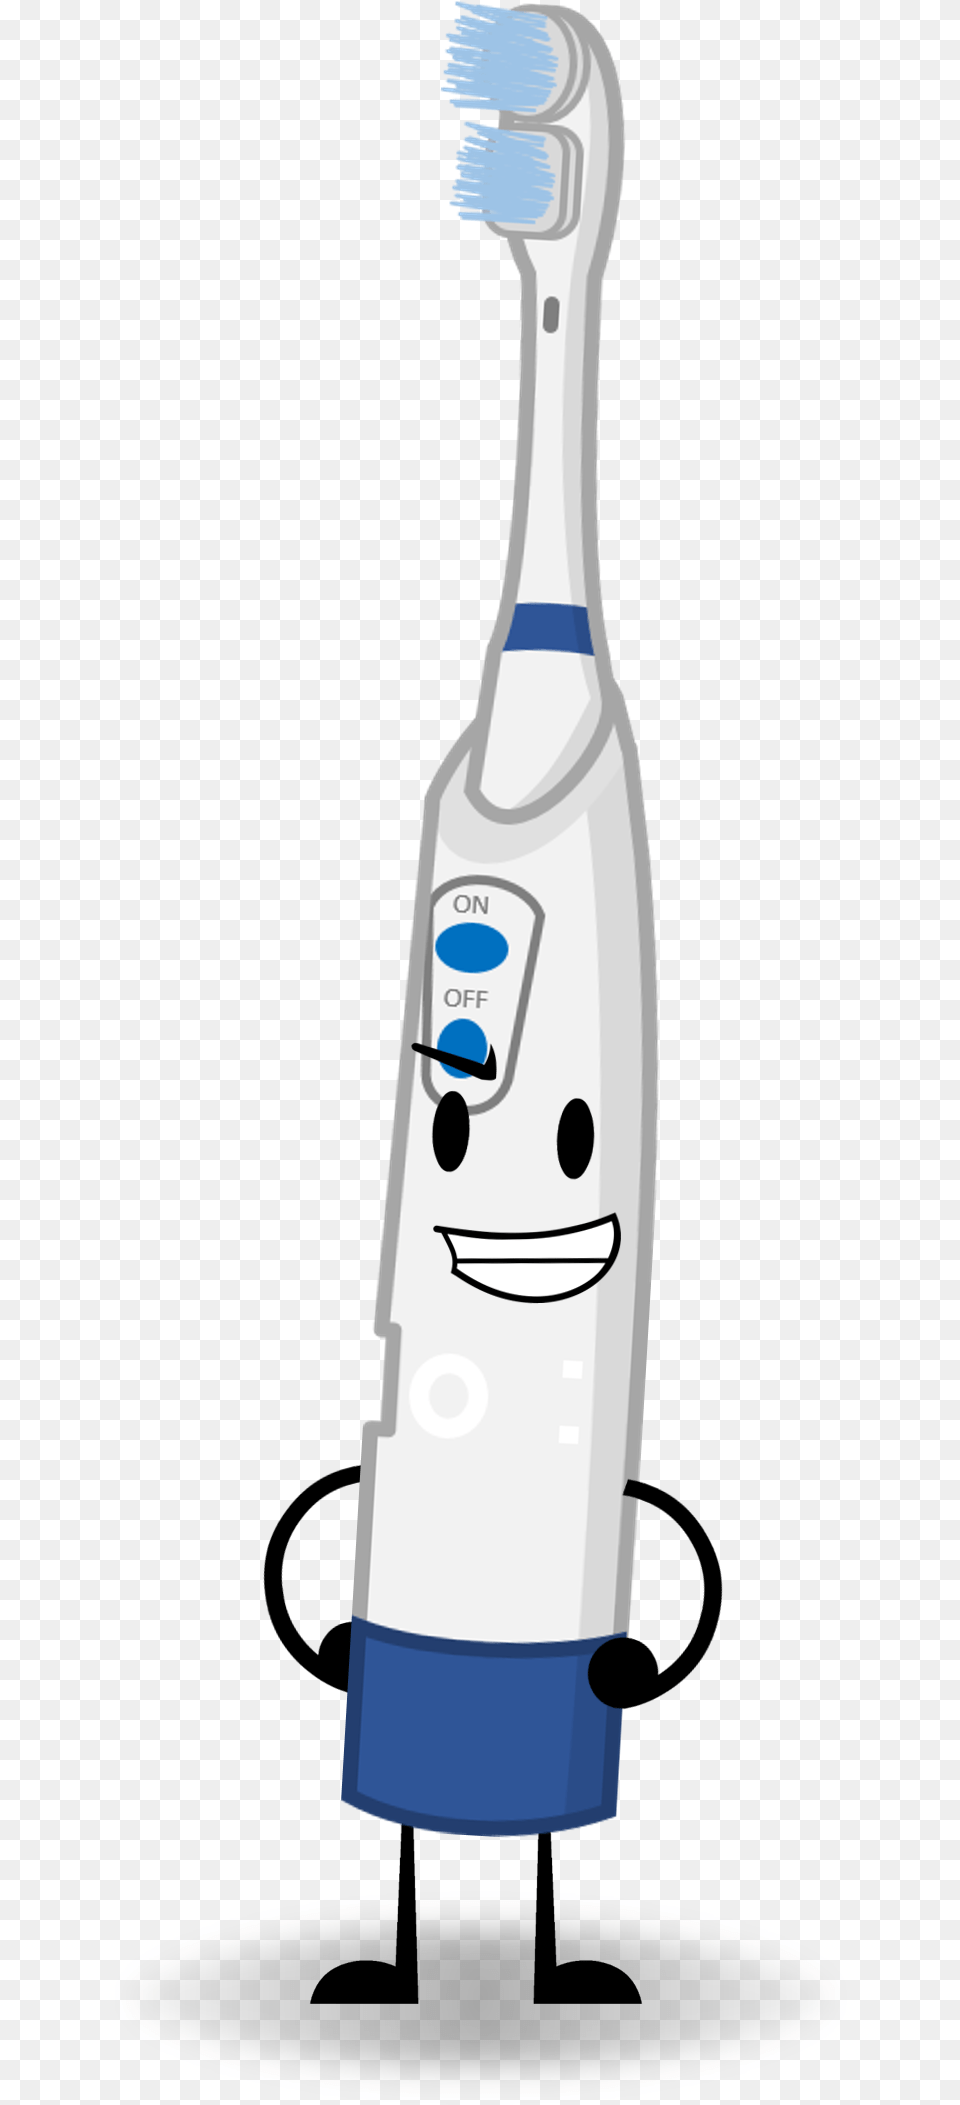 Toothbrush Object Connects Slimey And Toothbrush, Brush, Device, Tool Png